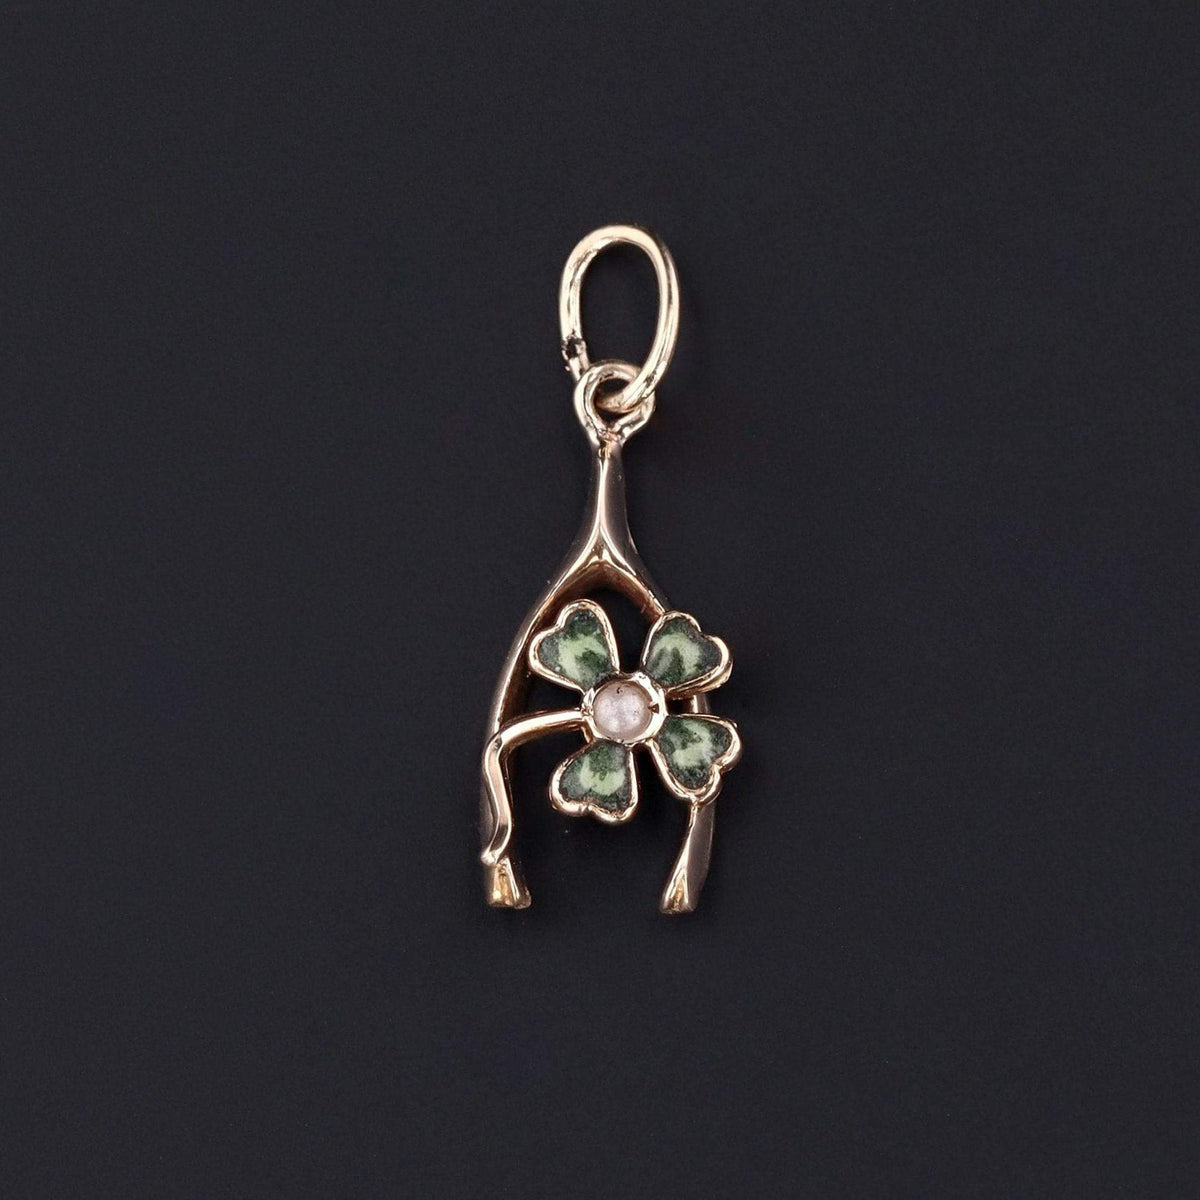 Antique Clover Charm | Good Luck Charm - Trademark Antiques